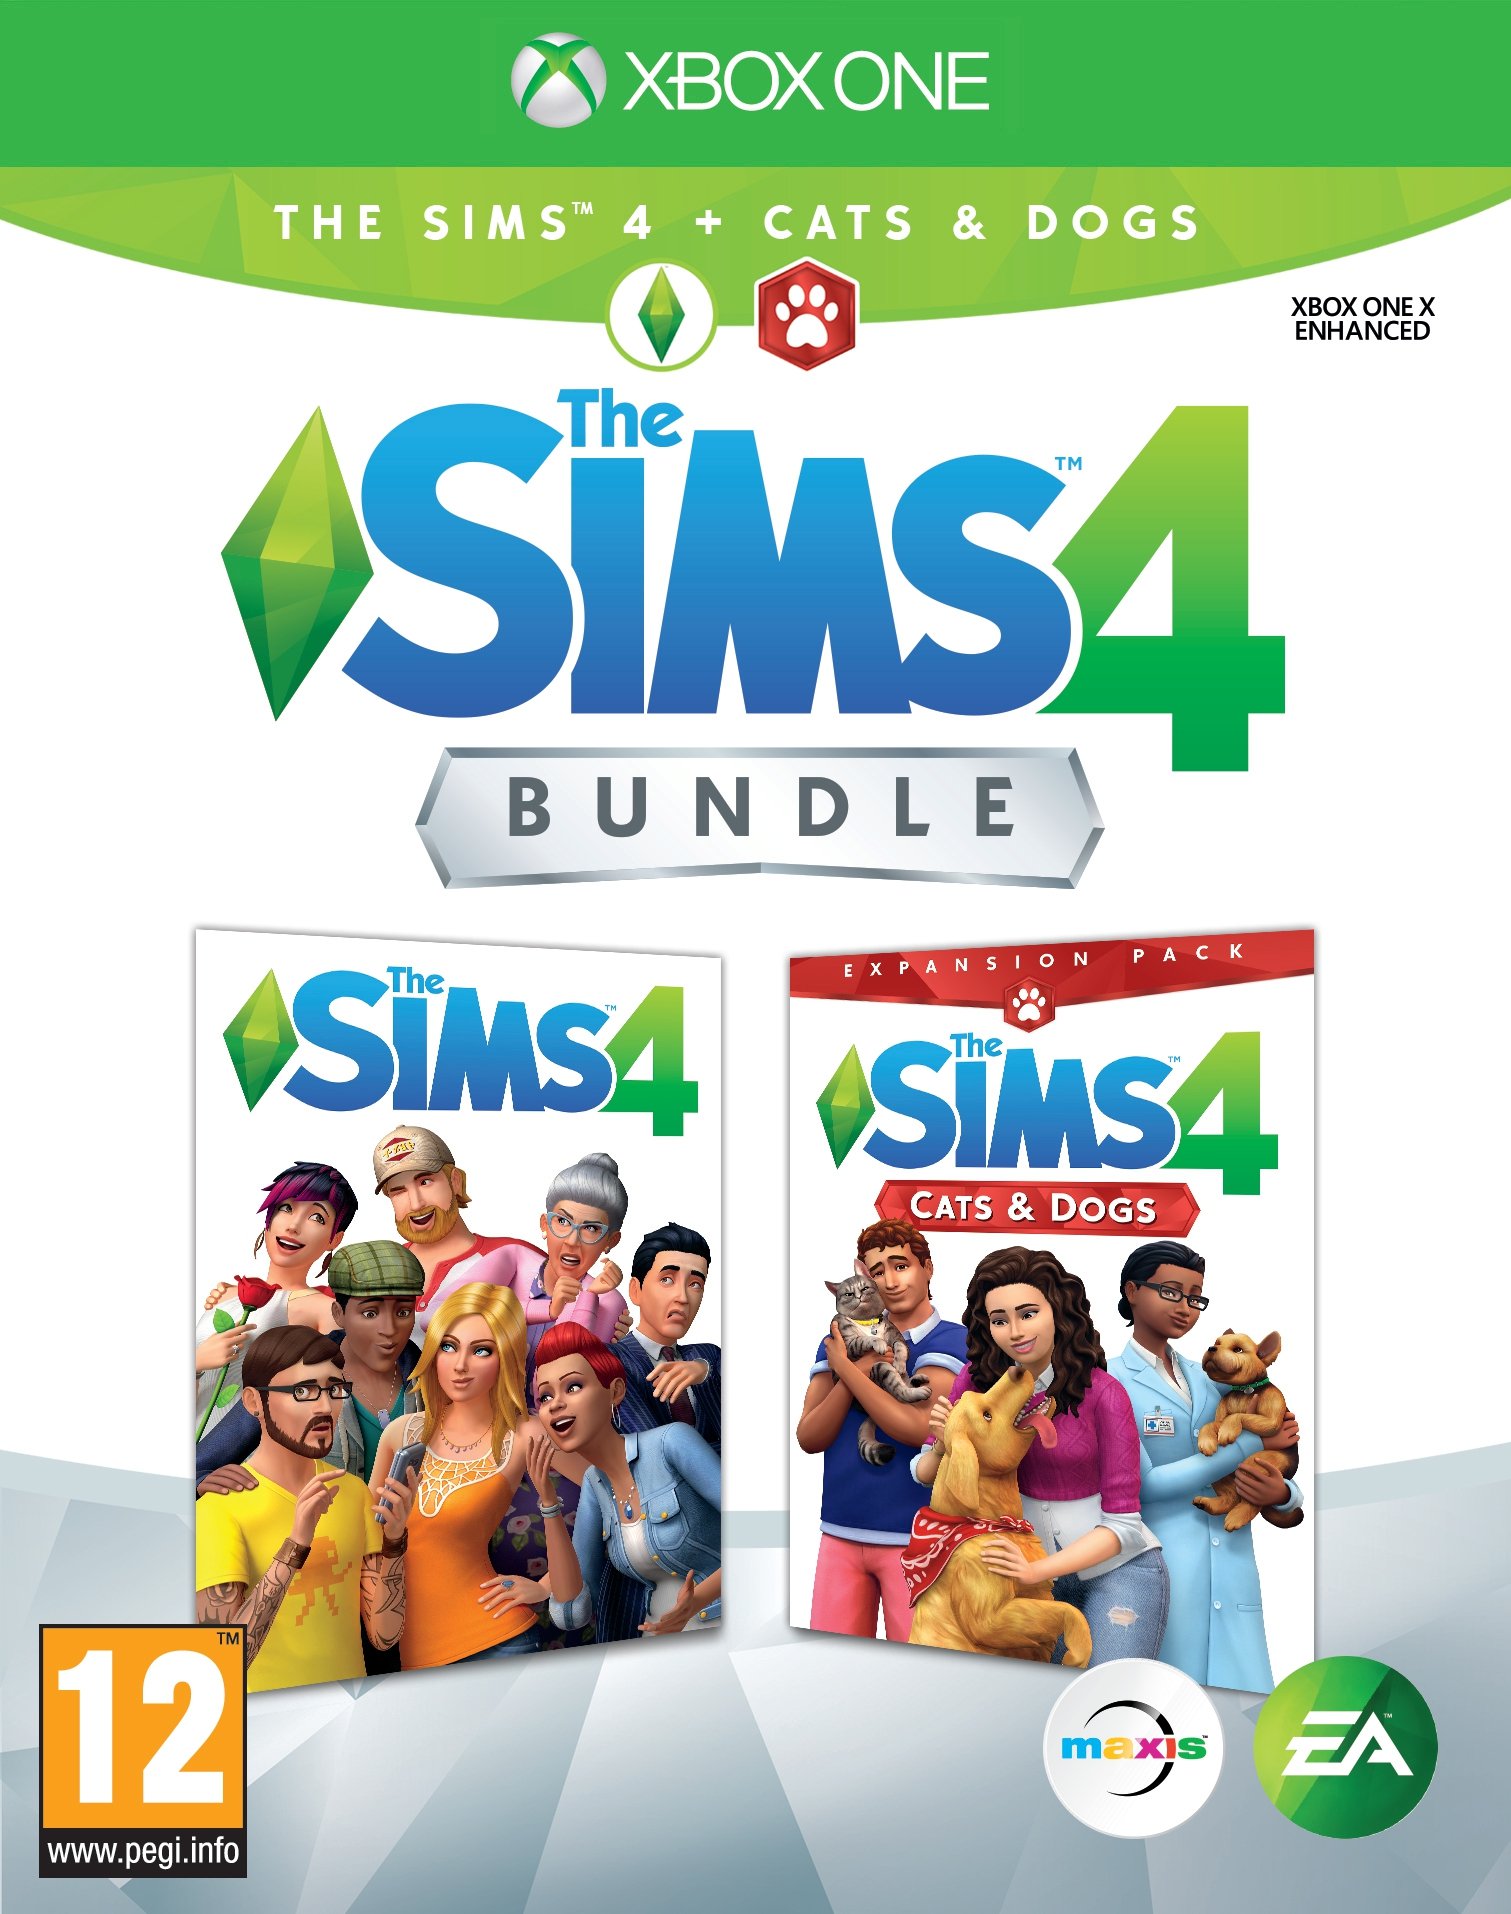 The Sims 4 & The Sims Cats & Dogs Bundle